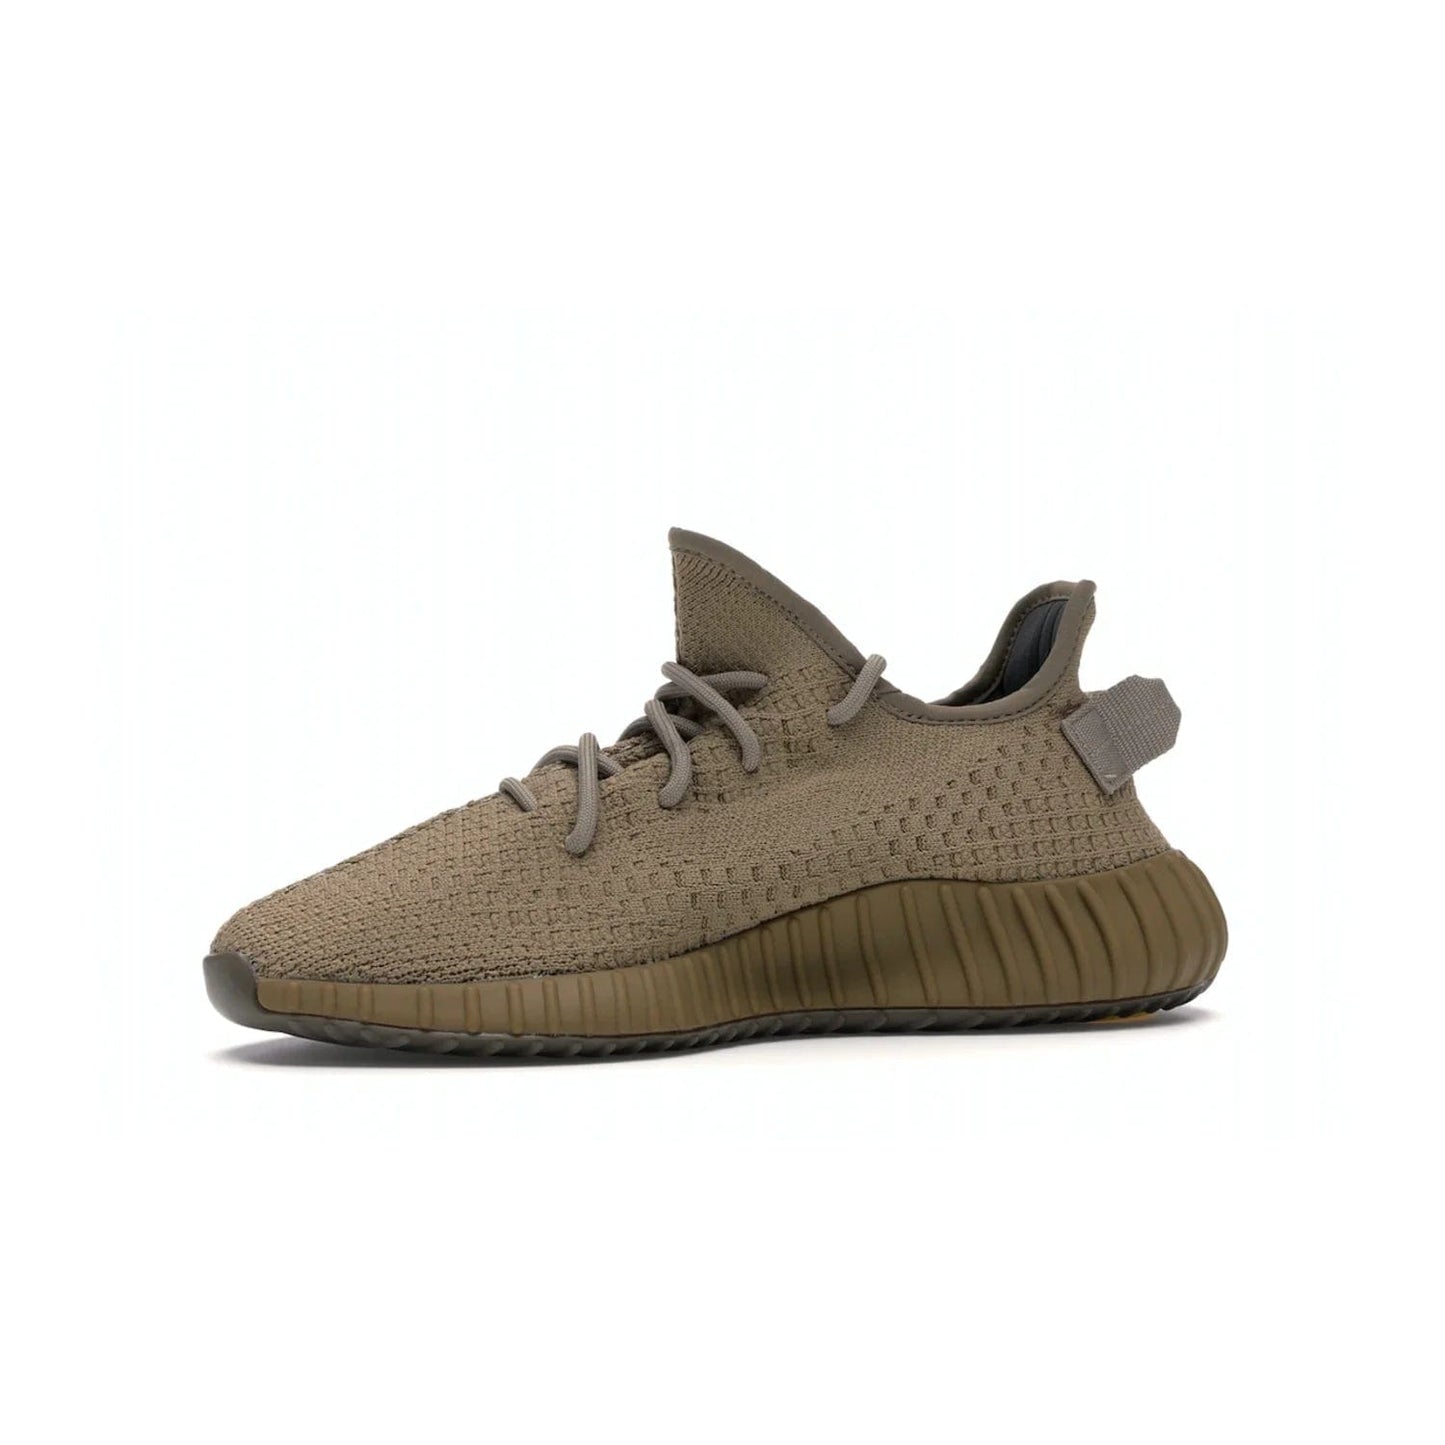 adidas Yeezy Boost 350 V2 Earth - Image 17 - Only at www.BallersClubKickz.com - Abstract style with the adidas Yeezy Boost 350 V2 Earth. Crafted with mud Primeknit upper, mud Boost and interior, and a translucent side stripe. Regional exclusive in Earth/Earth/Earth colorway, these fashionable sneakers released in February 2020. Showcase your style with the Yeezy 350 V2 Earth.